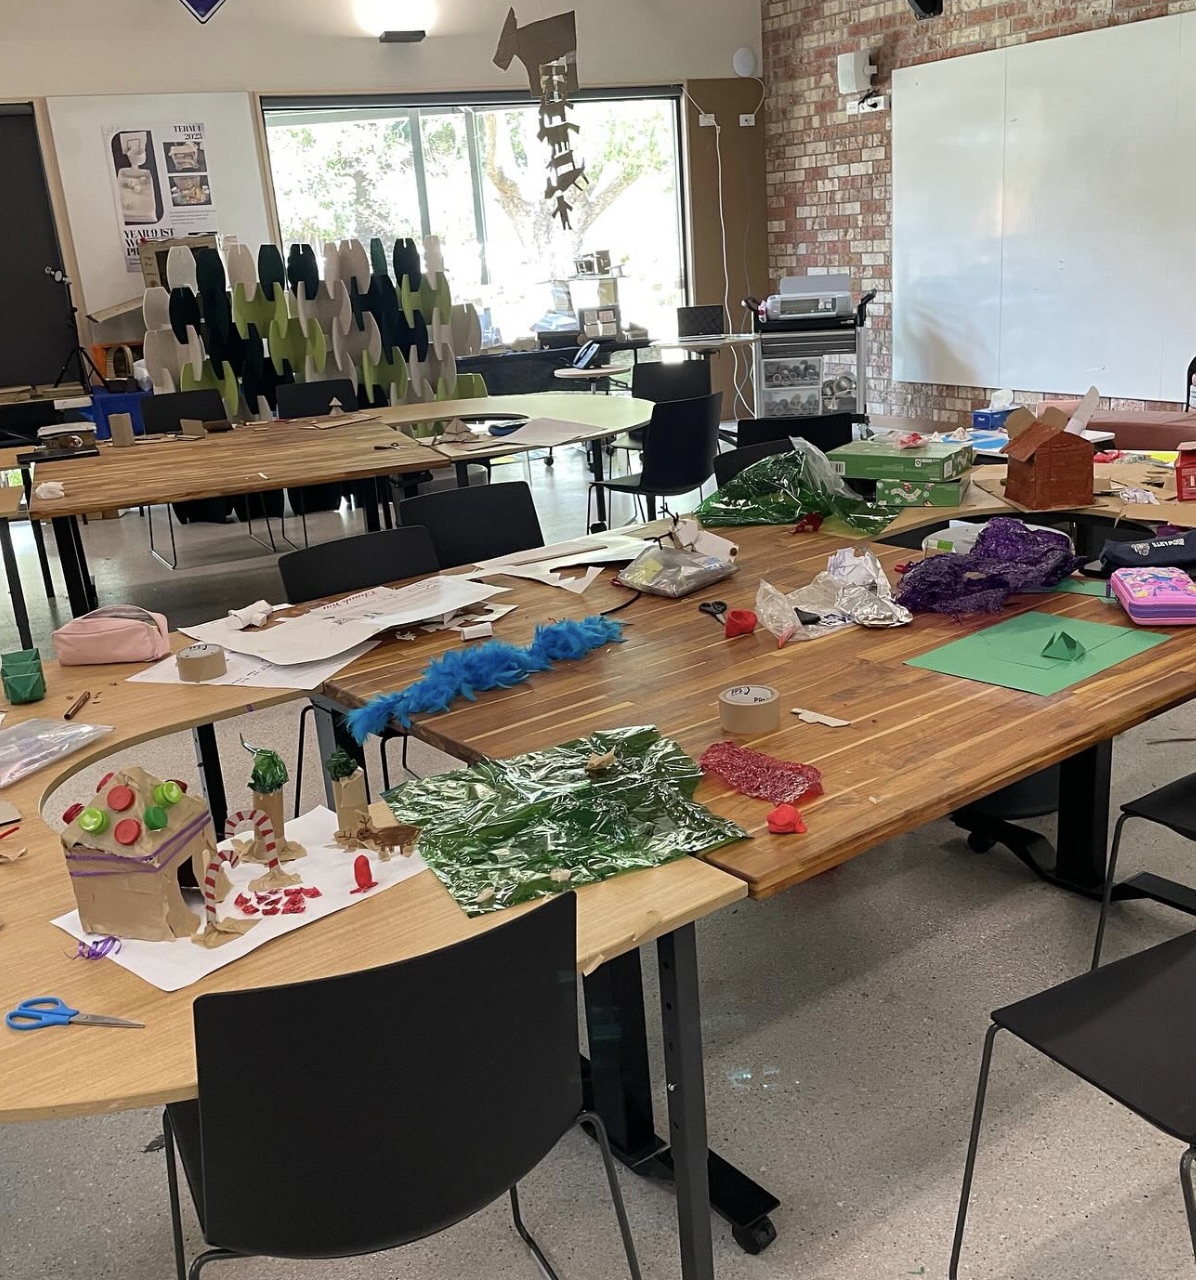 Makerspace with materials on the tables